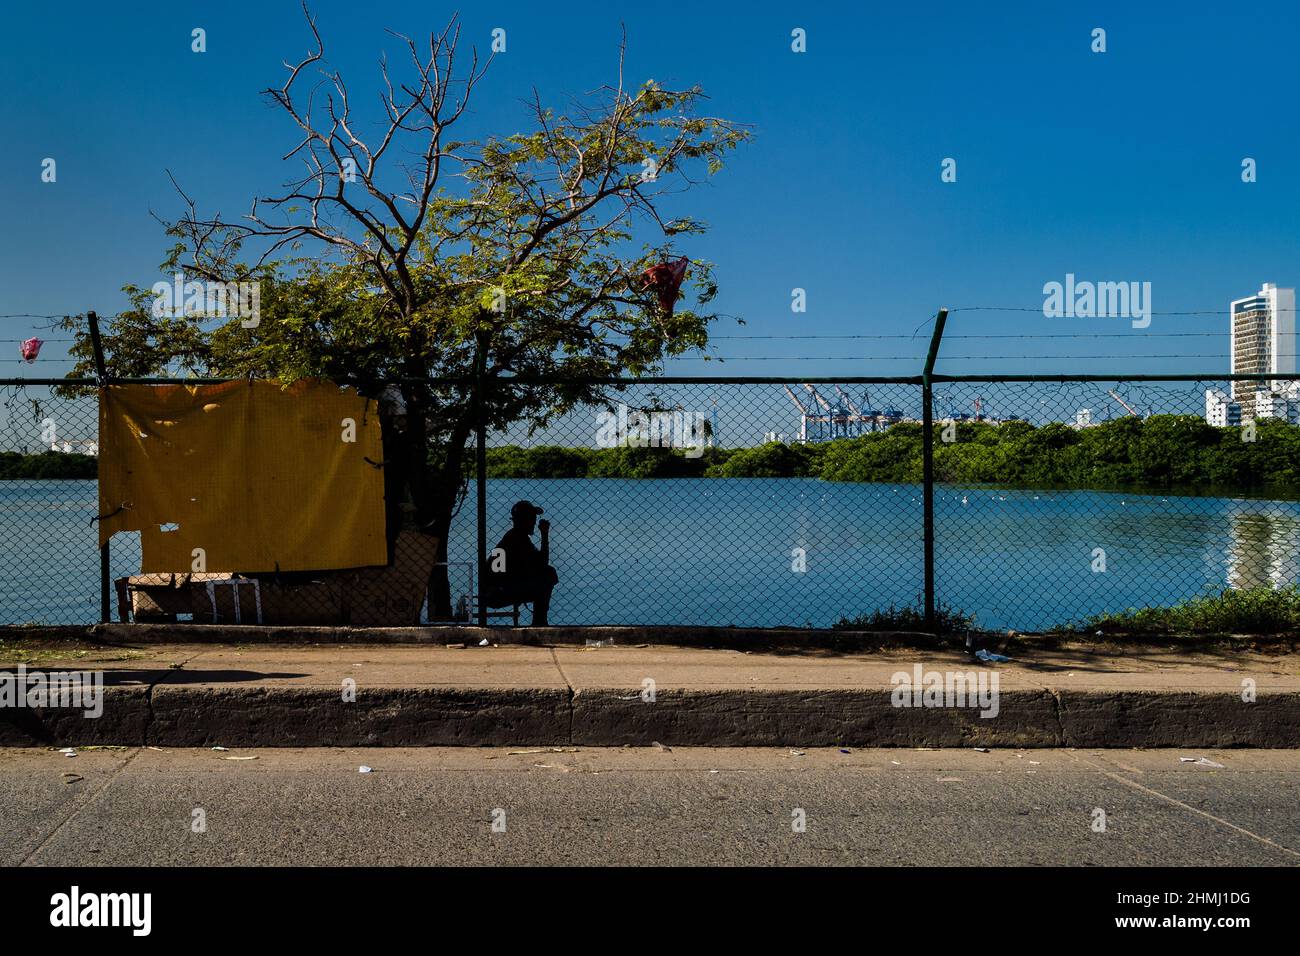 An Afro-Colombian man sits in front of a shack on the shore of the sea lagoon in Bahía de Manga, a luxurious neighborhood of Cartagena, Colombia. Stock Photo